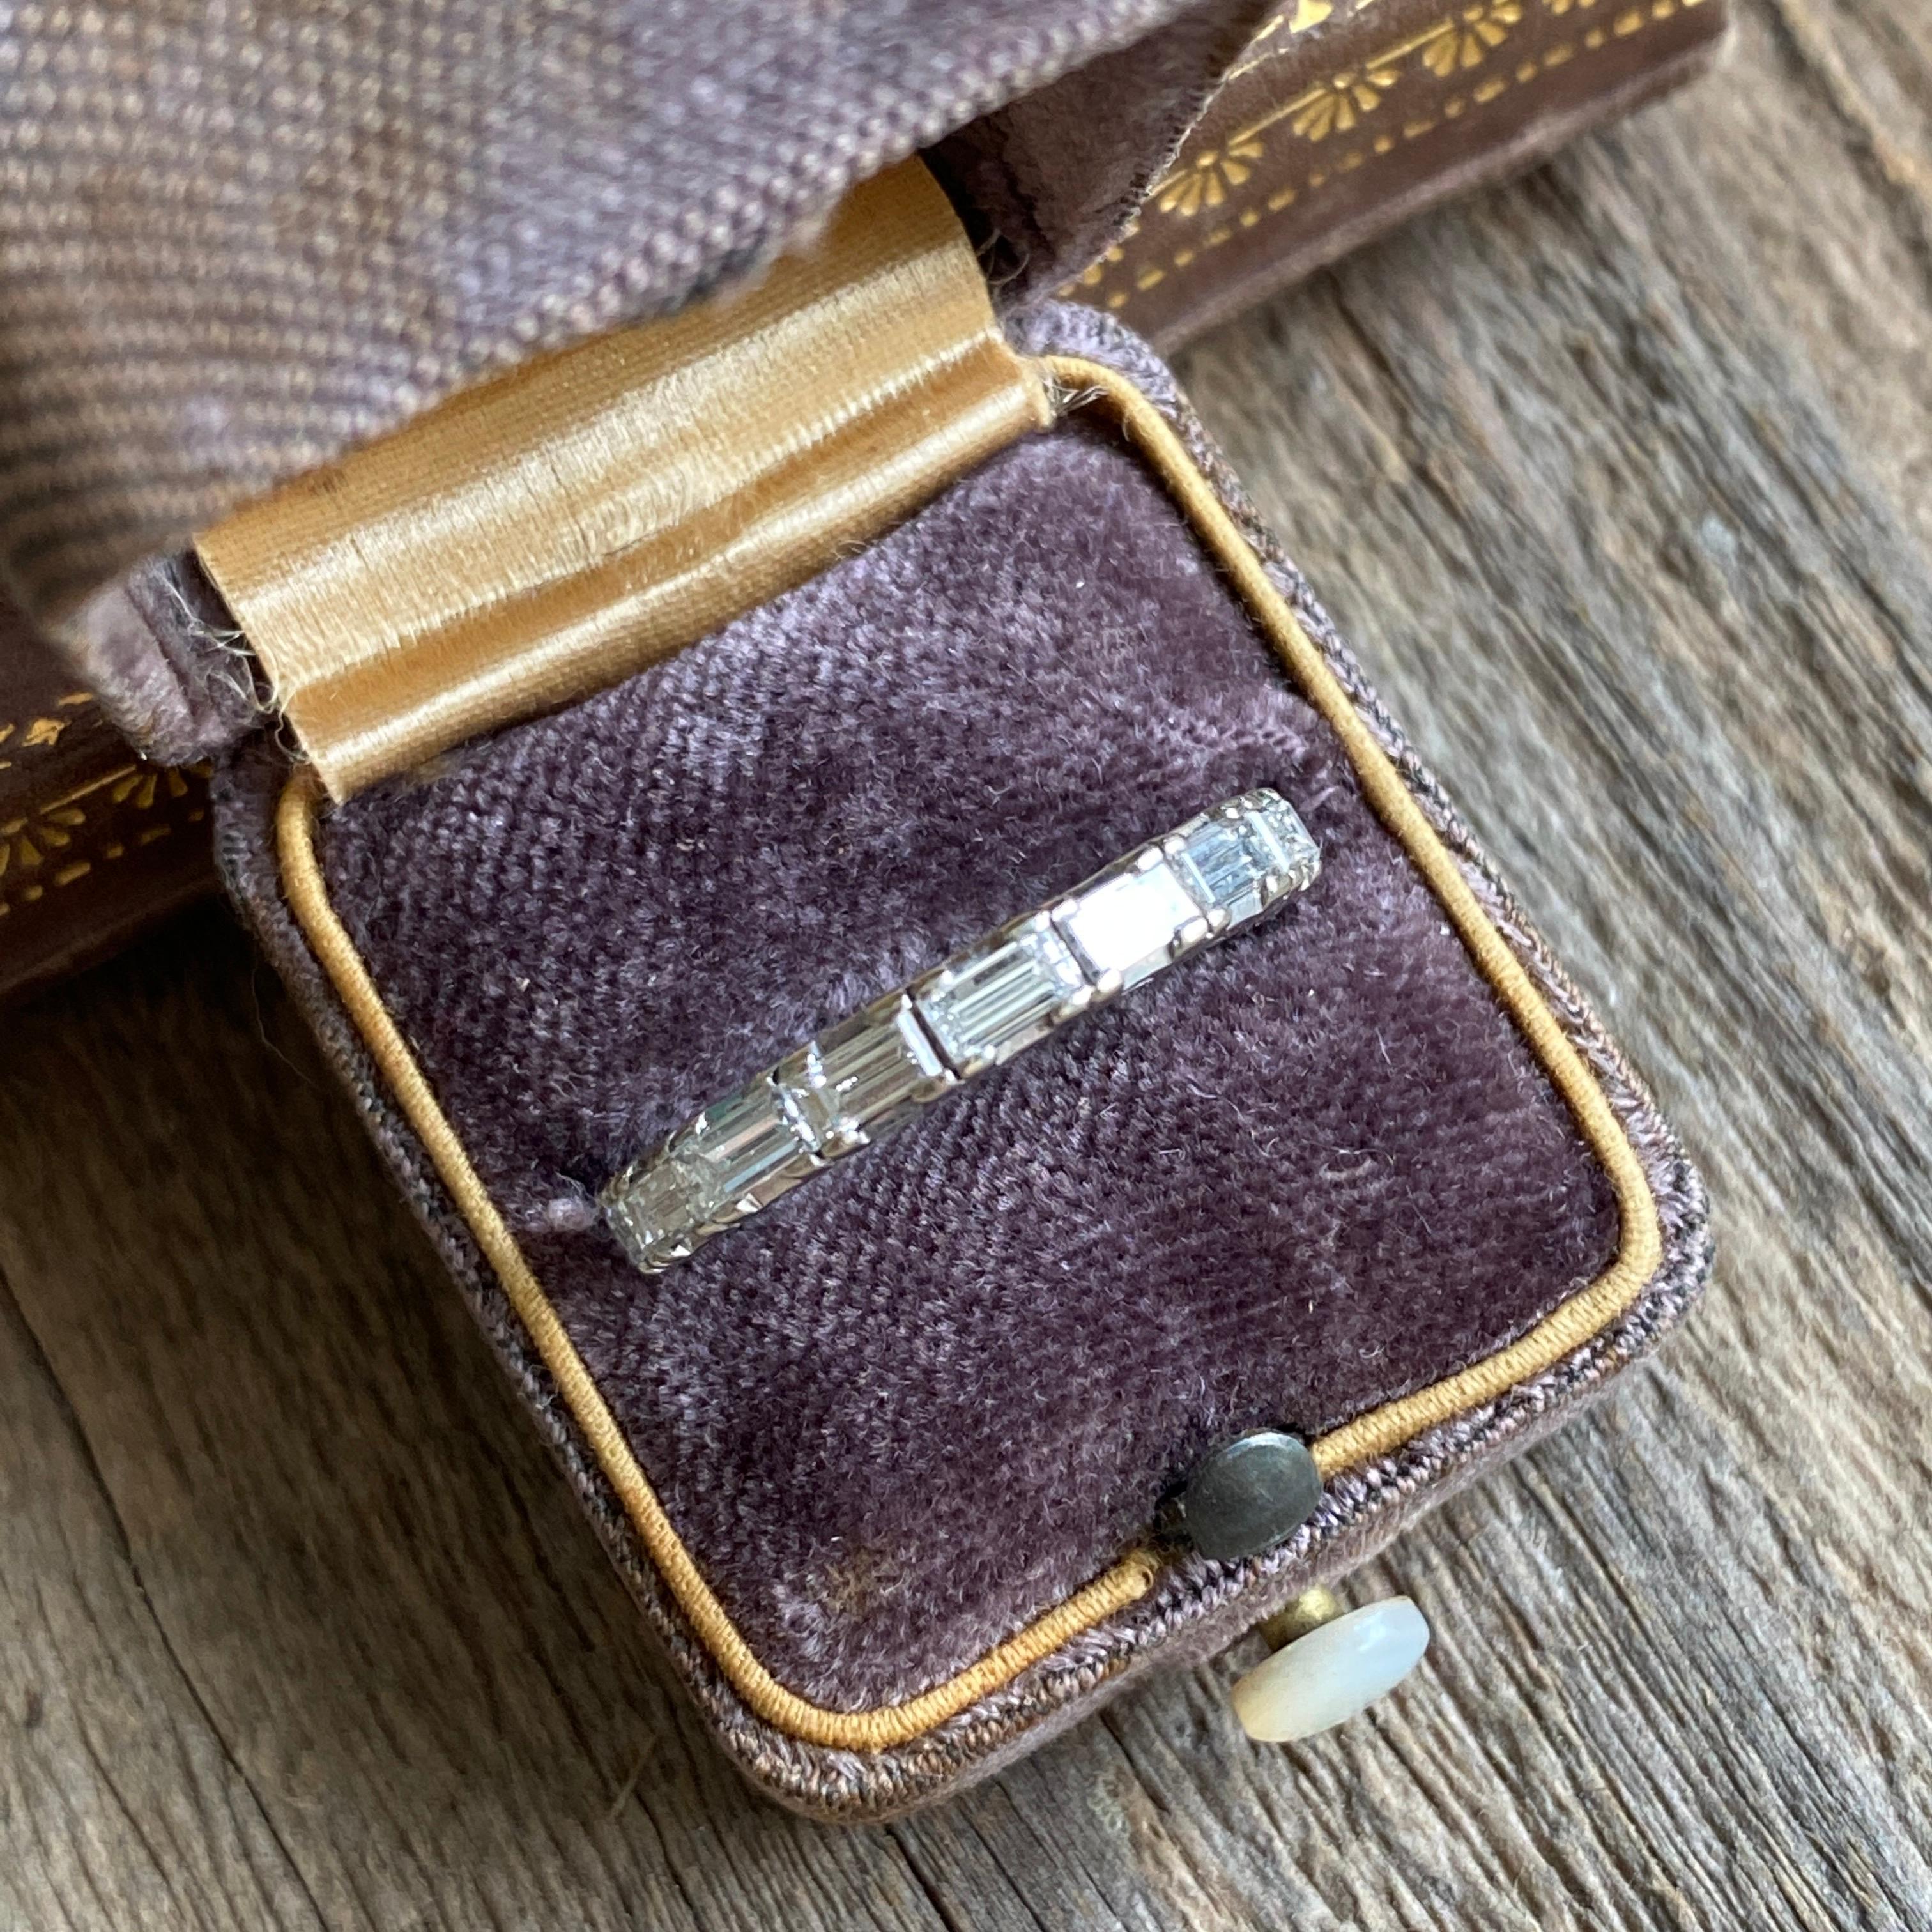 Details:
Absolutely stunning vintage 18K white gold, 2 carat baguette diamond band. Major bling in this chunky baguette ring—the diamonds are nice size, and full of sparkle and bling! This would look great in a stack, with a solitaire diamond, or